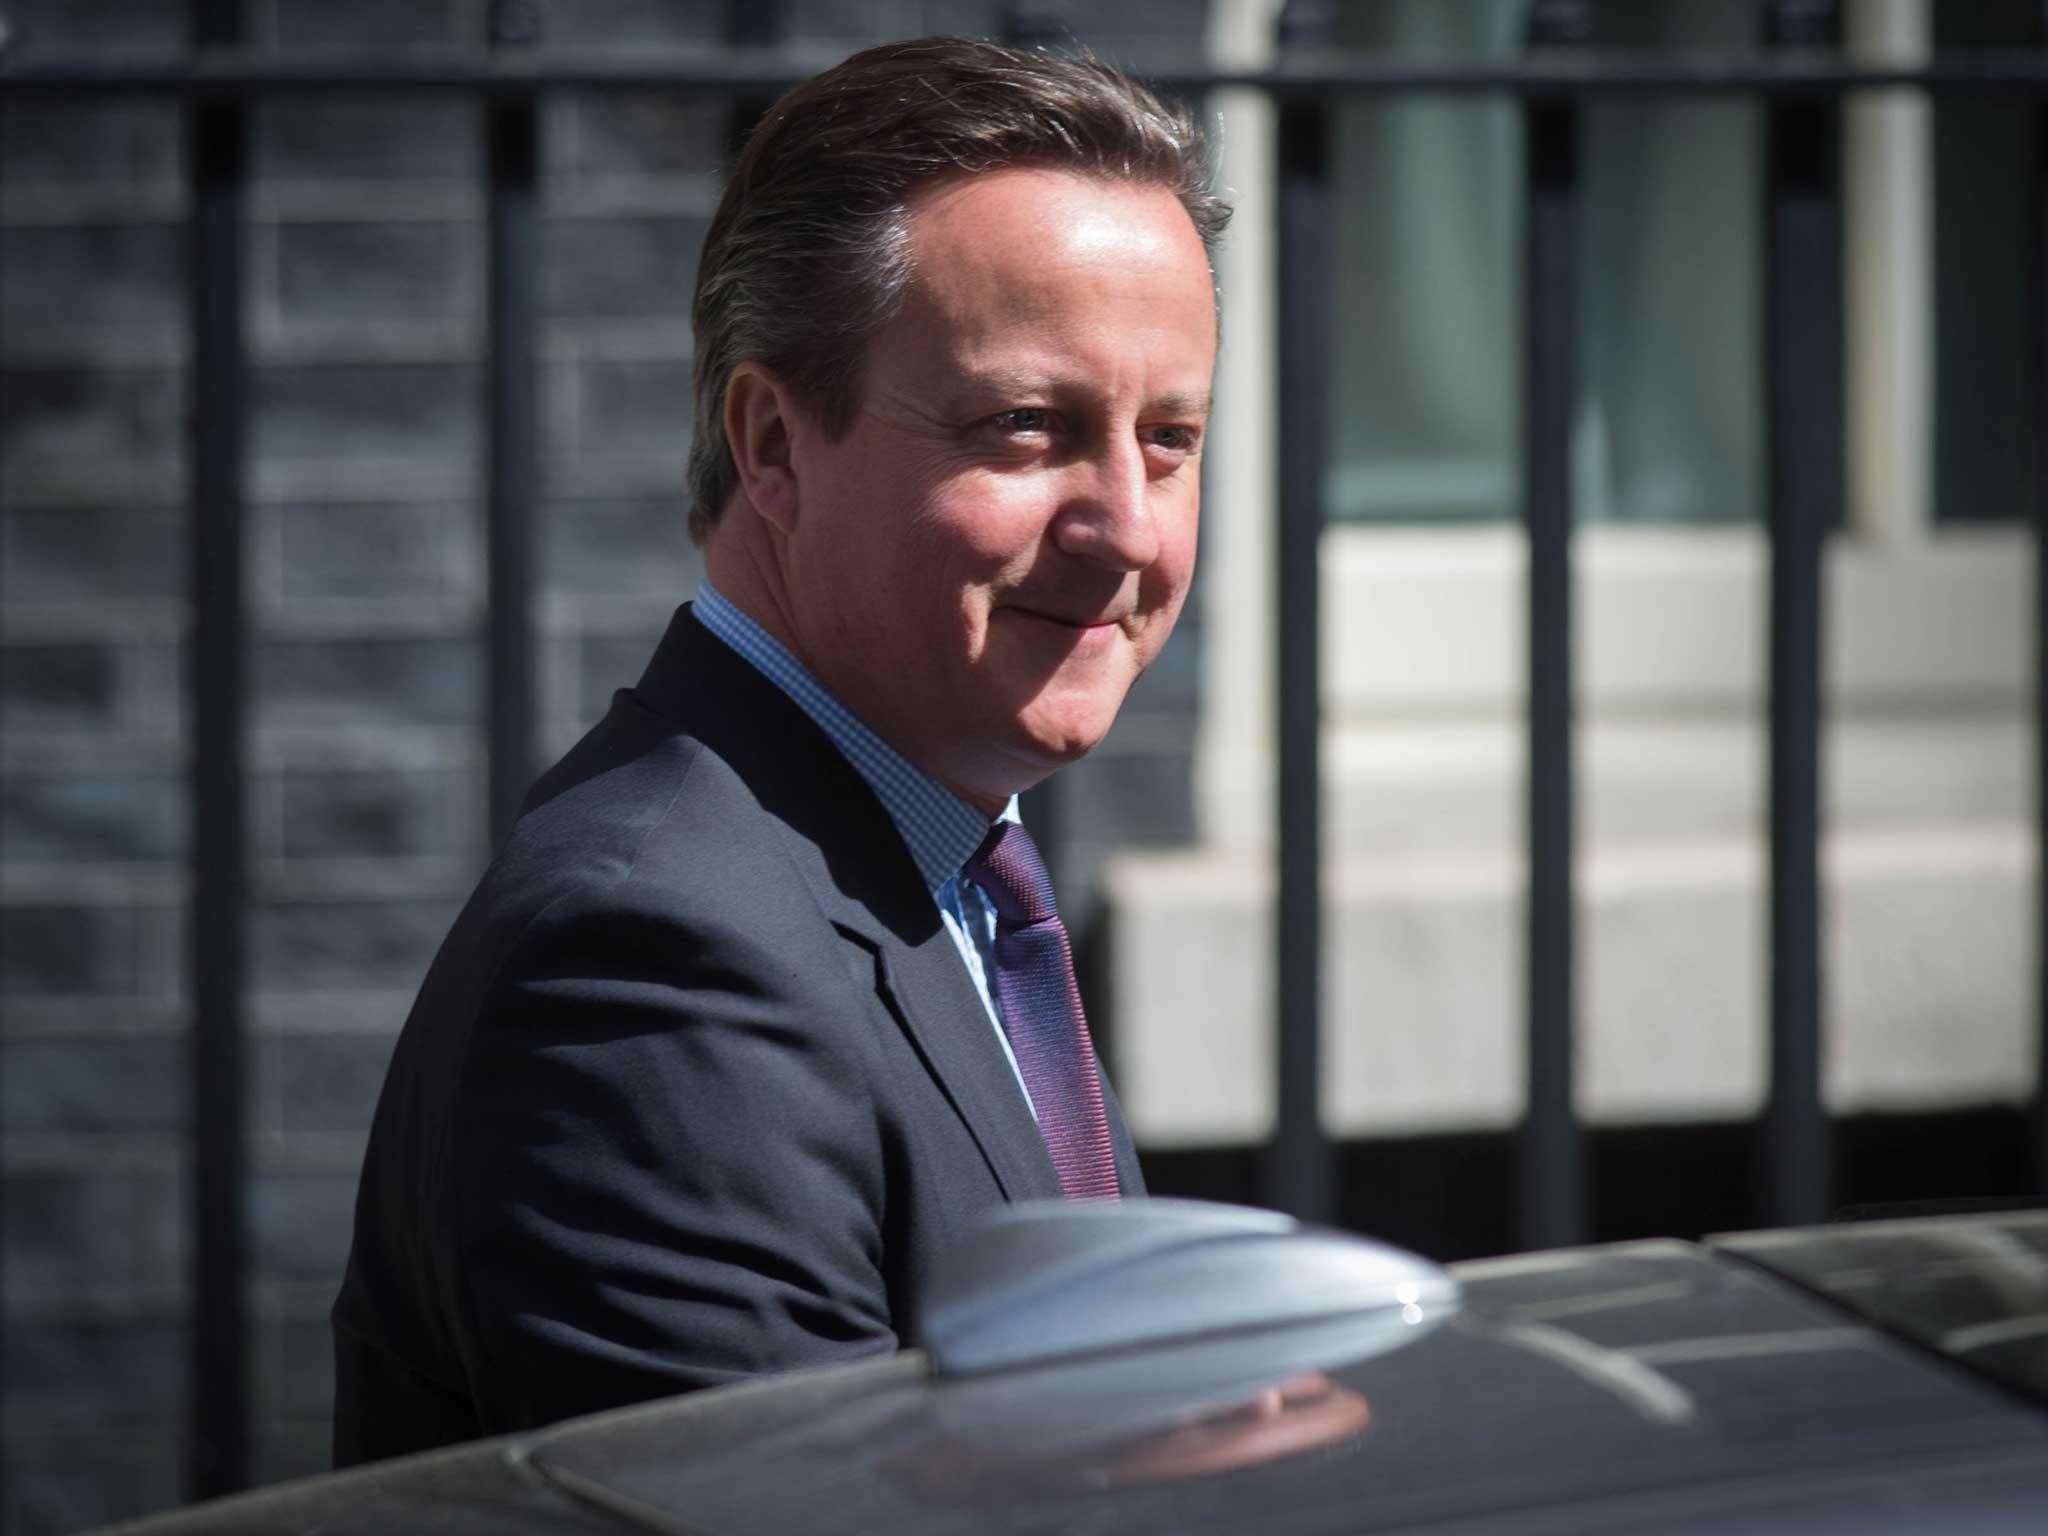 David Cameron leaves 10 Downing Street in London to travel to the House of Commons